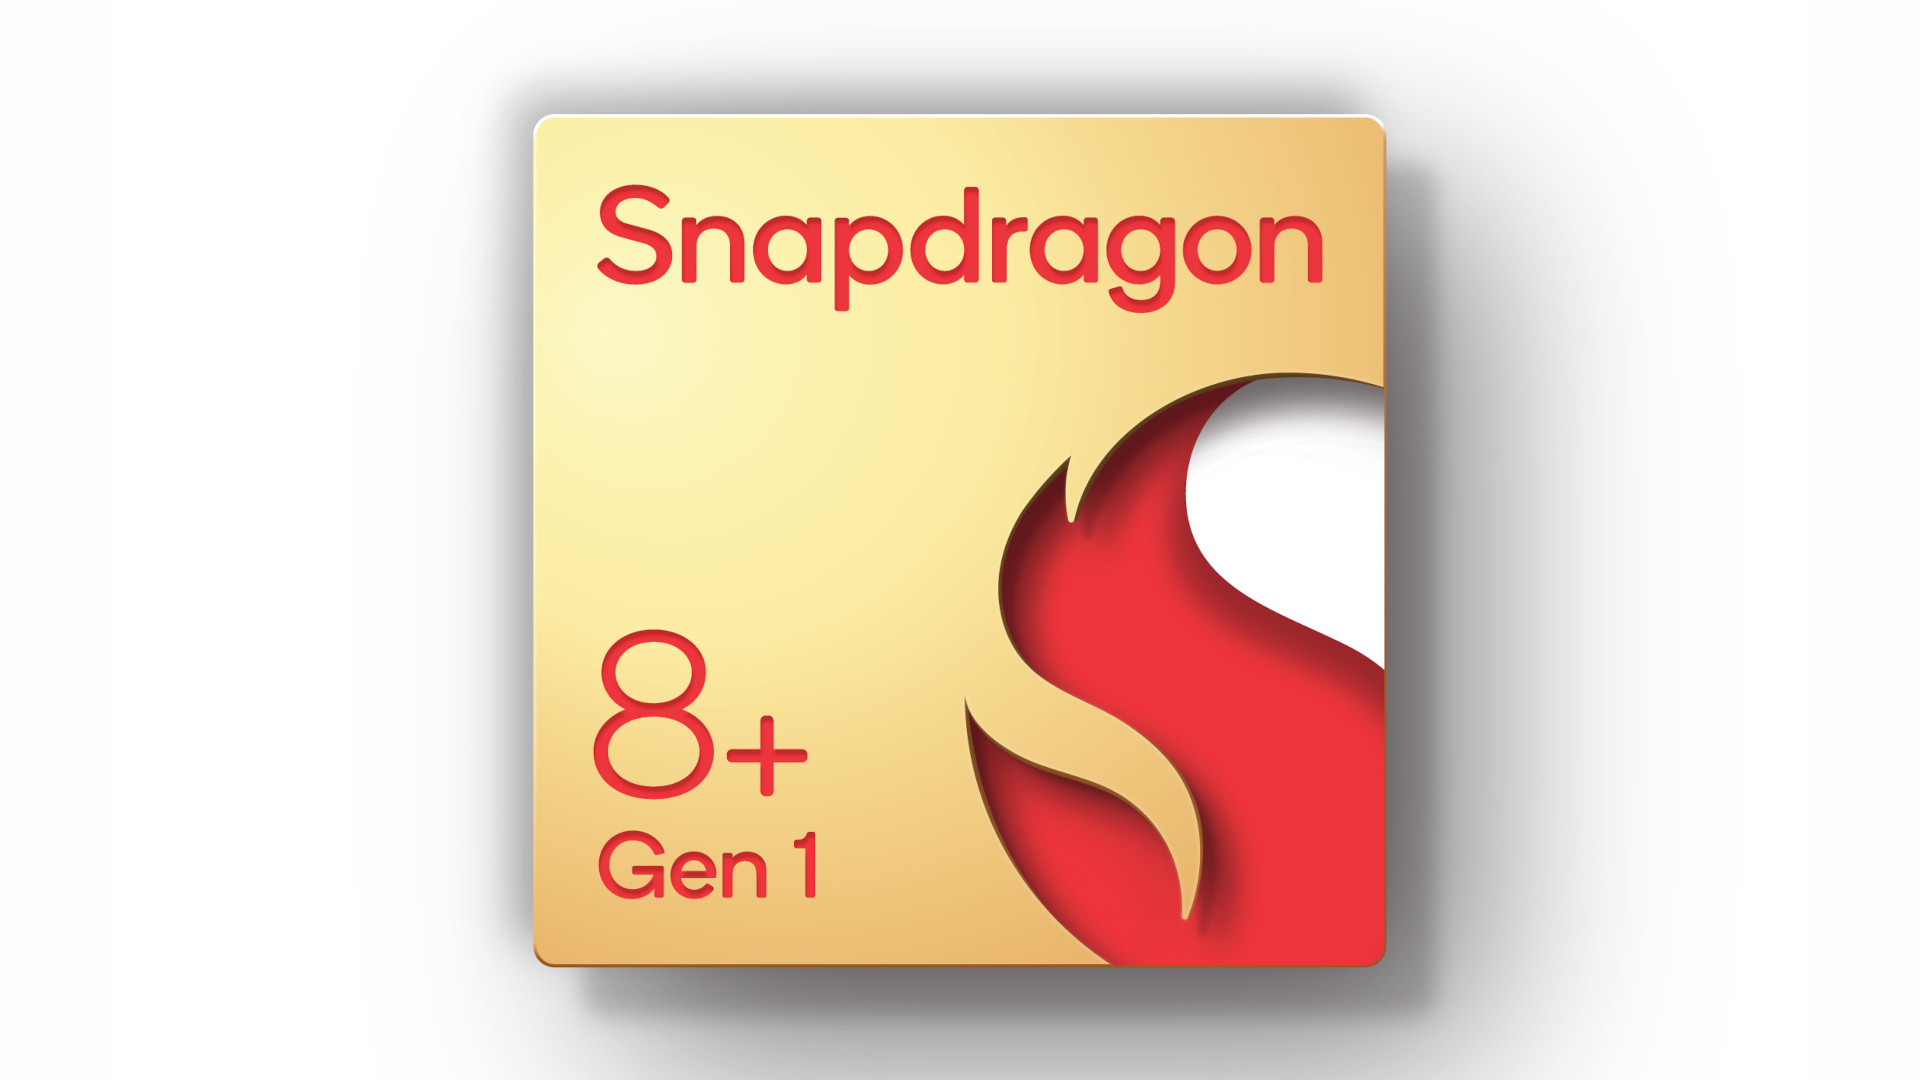 Qualcomm and Samsung Debut the Most Advanced Snapdragon Ever